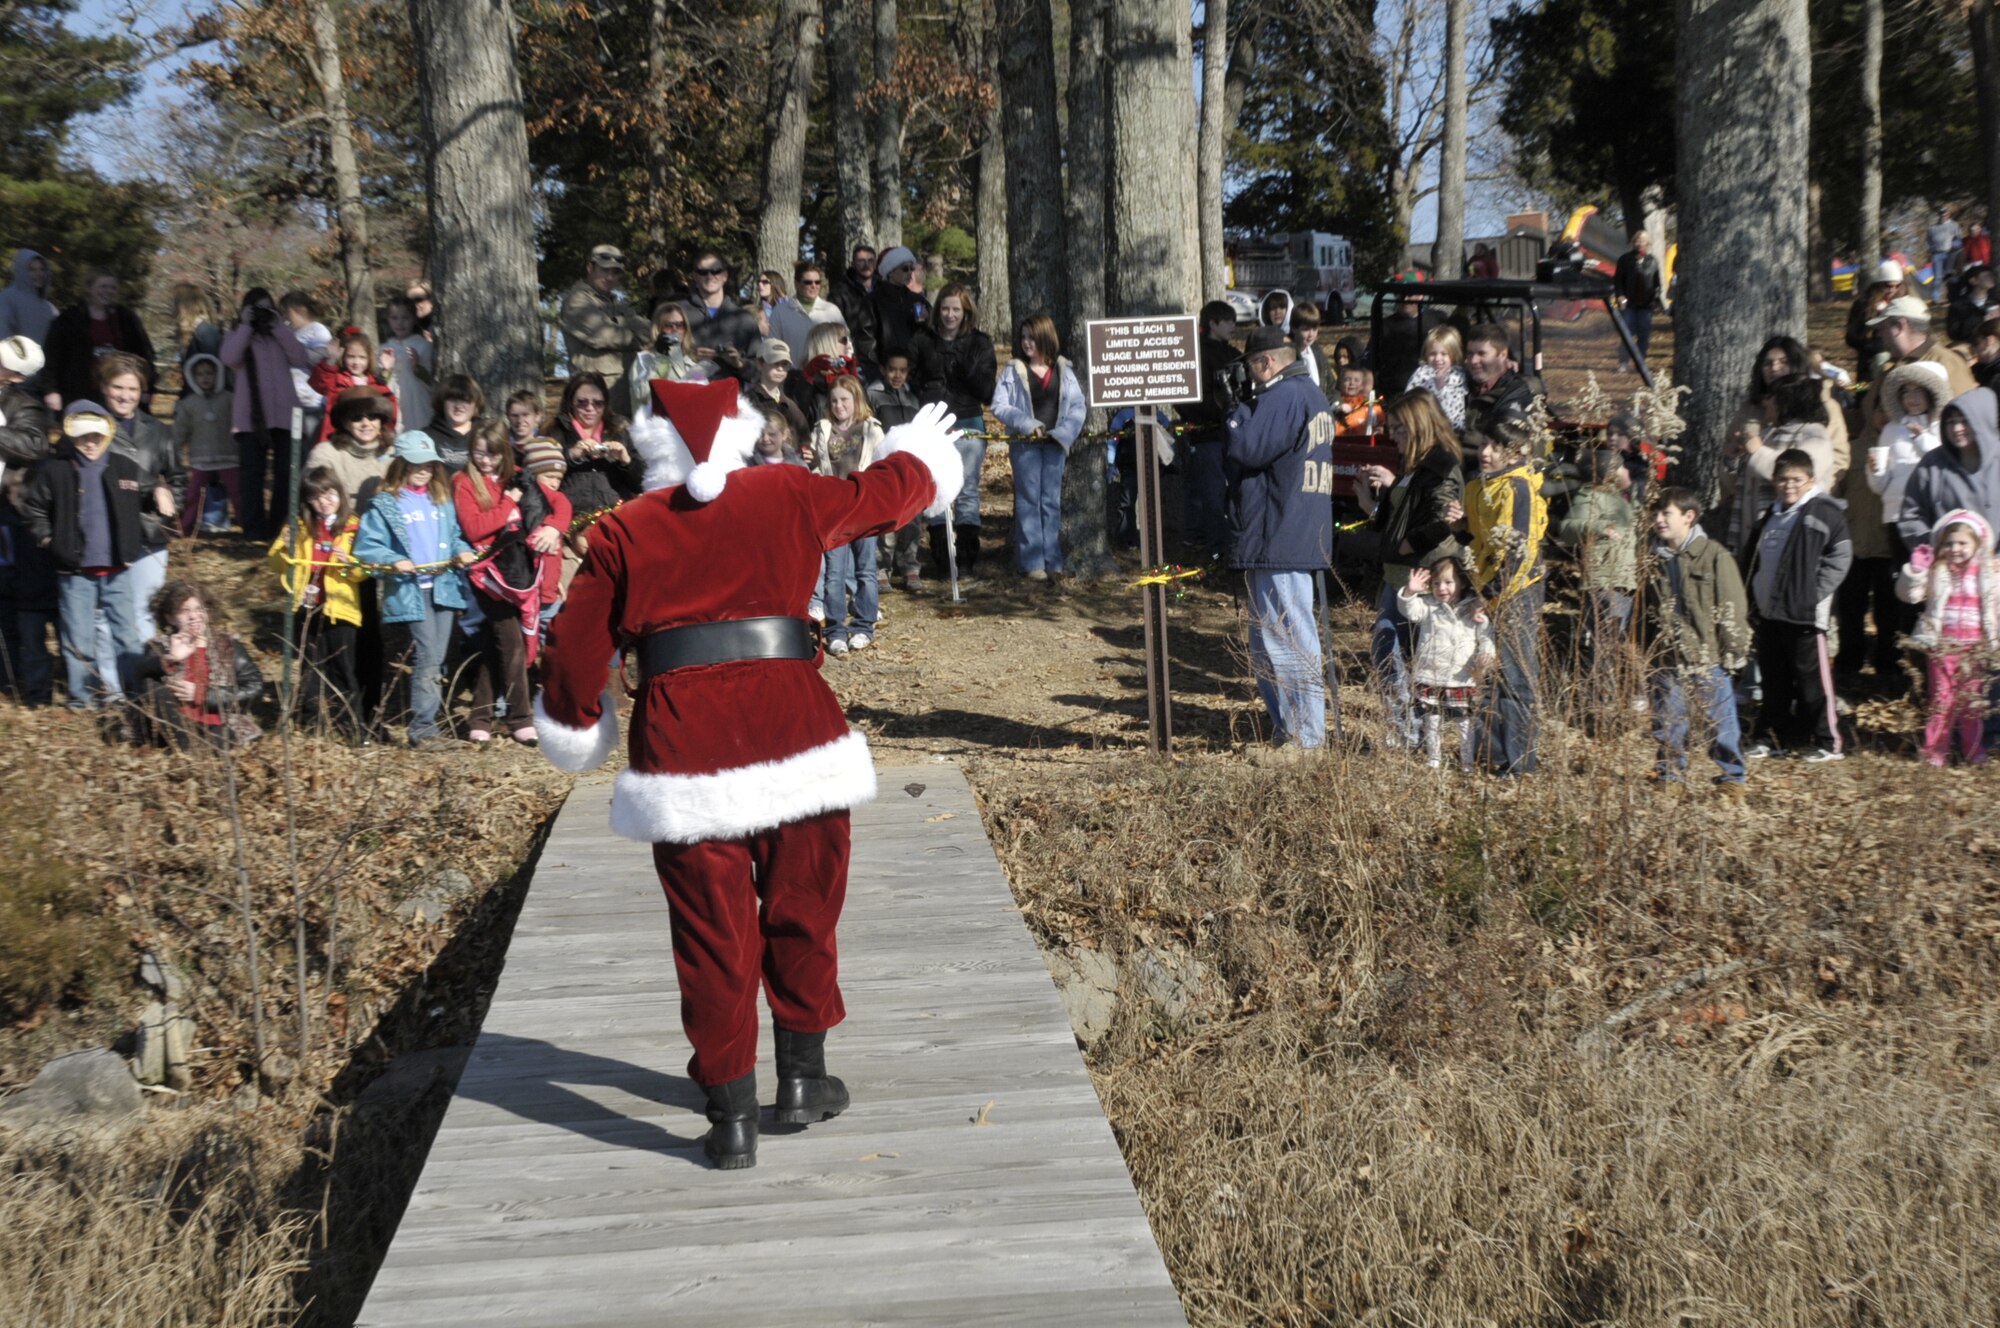 Santa waves to more than 500 children at the end of the dock who attended the annual Children’s Christmas Party Dec. 7. (photo by Rick Goodfriend)